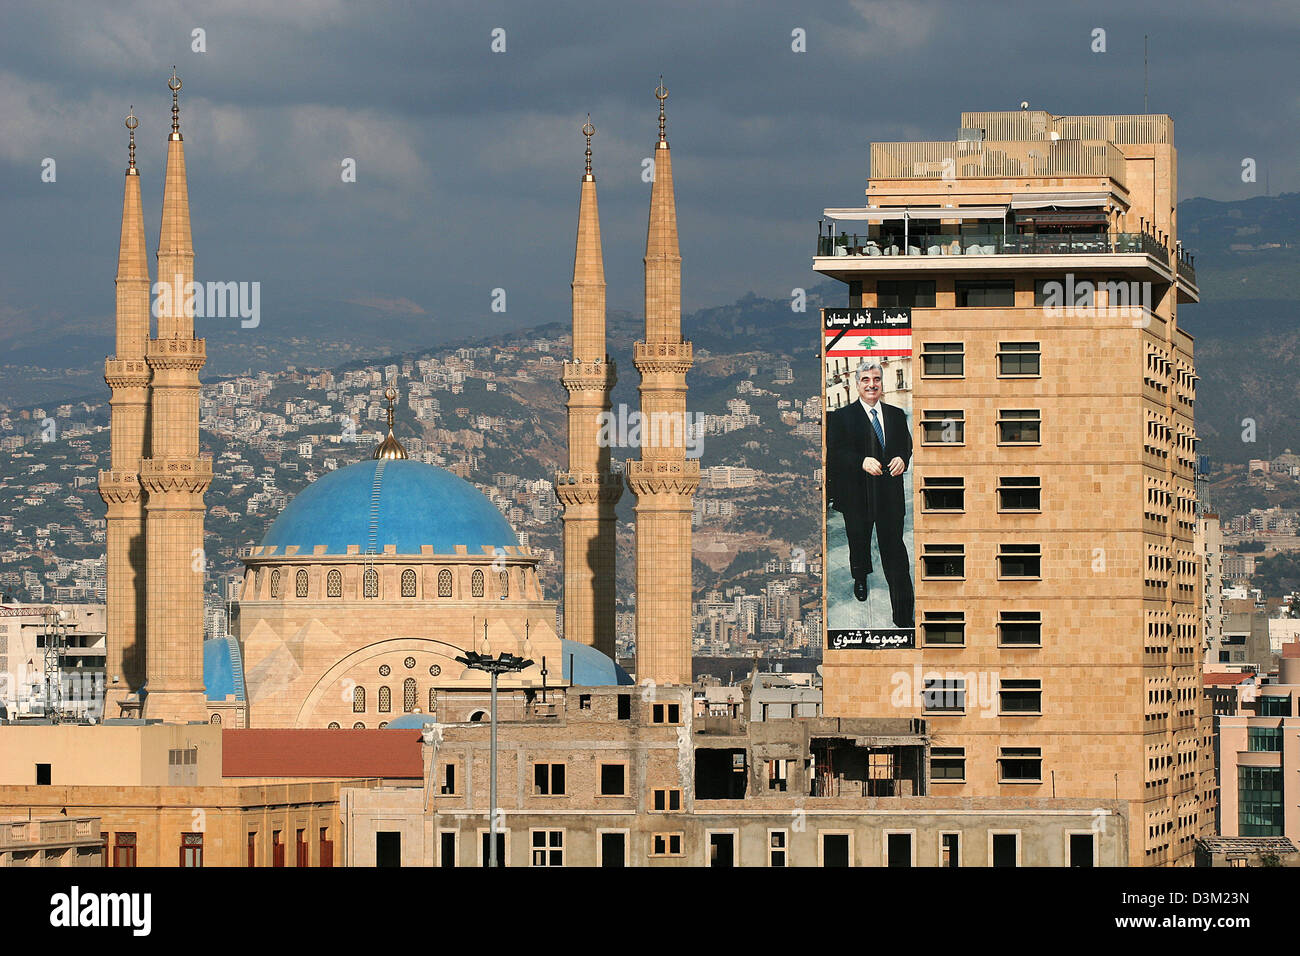 (dpa) - The picture shows a new mosque (L) and a building with a billboard of the murdered politician Rafik Hariri in Beirut, Lebanon, 01 October 2005. Former Lebanese Prime Minister Hariri and 20 other people got killed in a bomb attack on 14 February 2005. Regarding to a UN report publicised on 21 October 2005, Syrian security forces were involved in the assassination. Photo: Oli Stock Photo